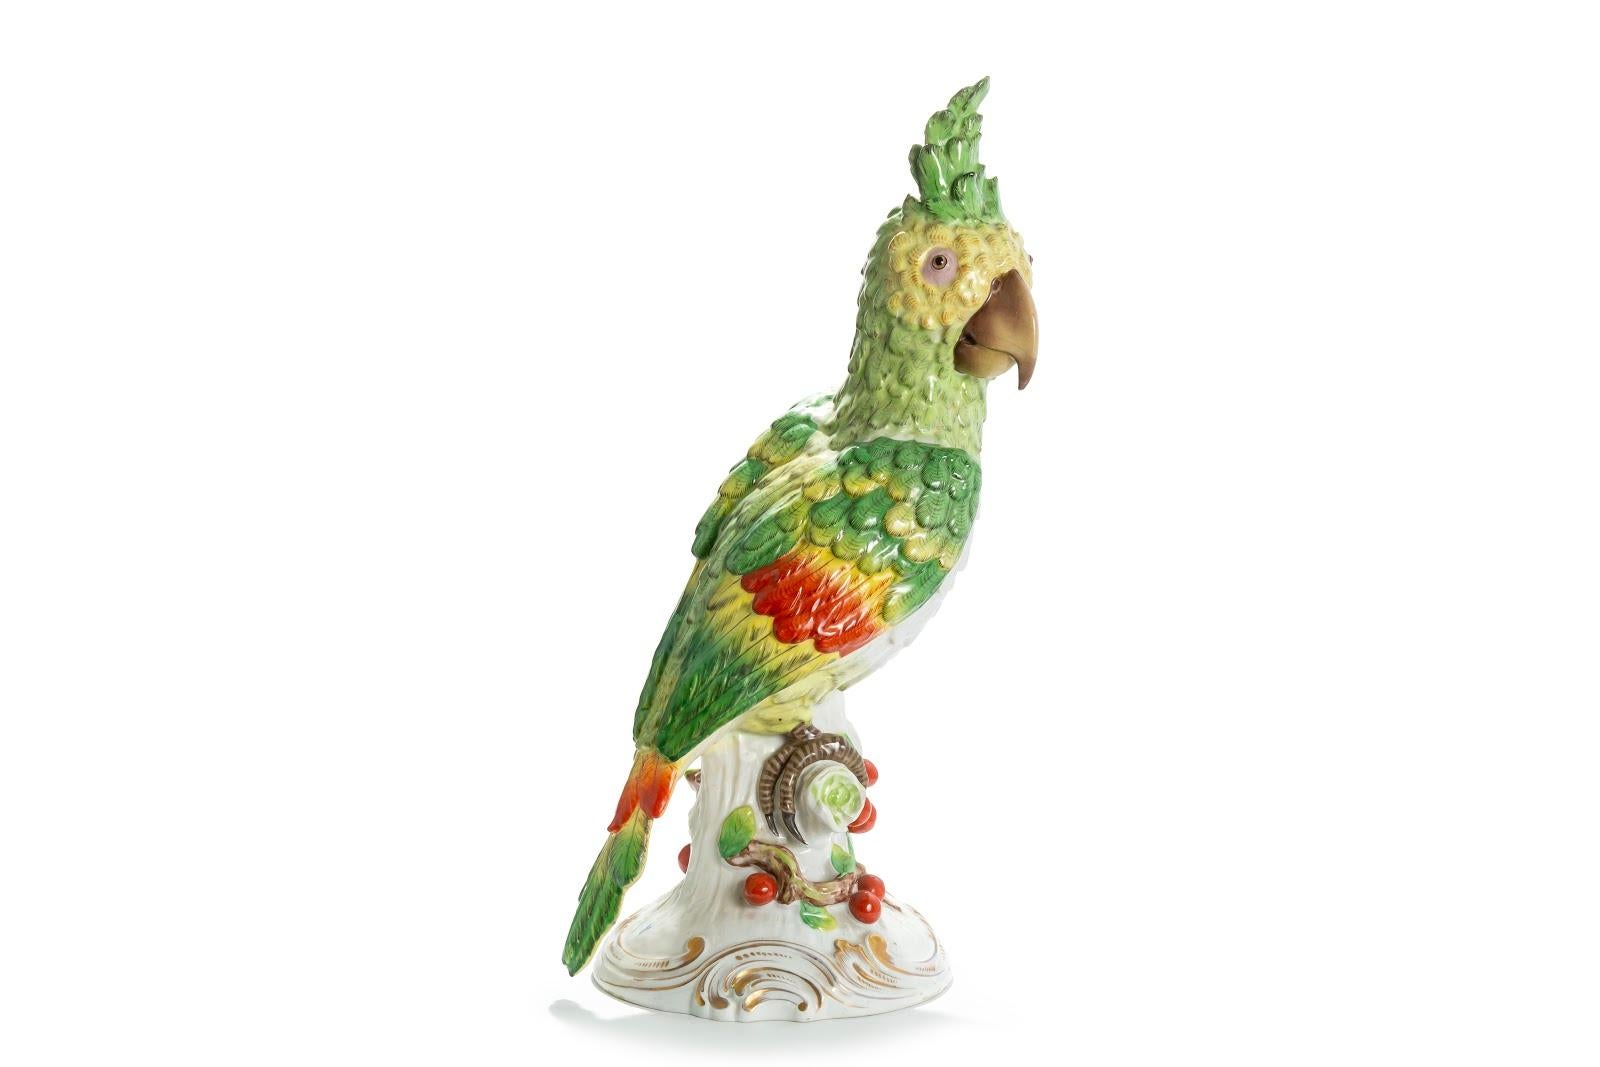 One tail of the parrot is slightly restored.
19th century
Porcelain
Meissen, Germany
Mark for Meissen
Measures: Height 54 cm
Width 22 cm.
   
    